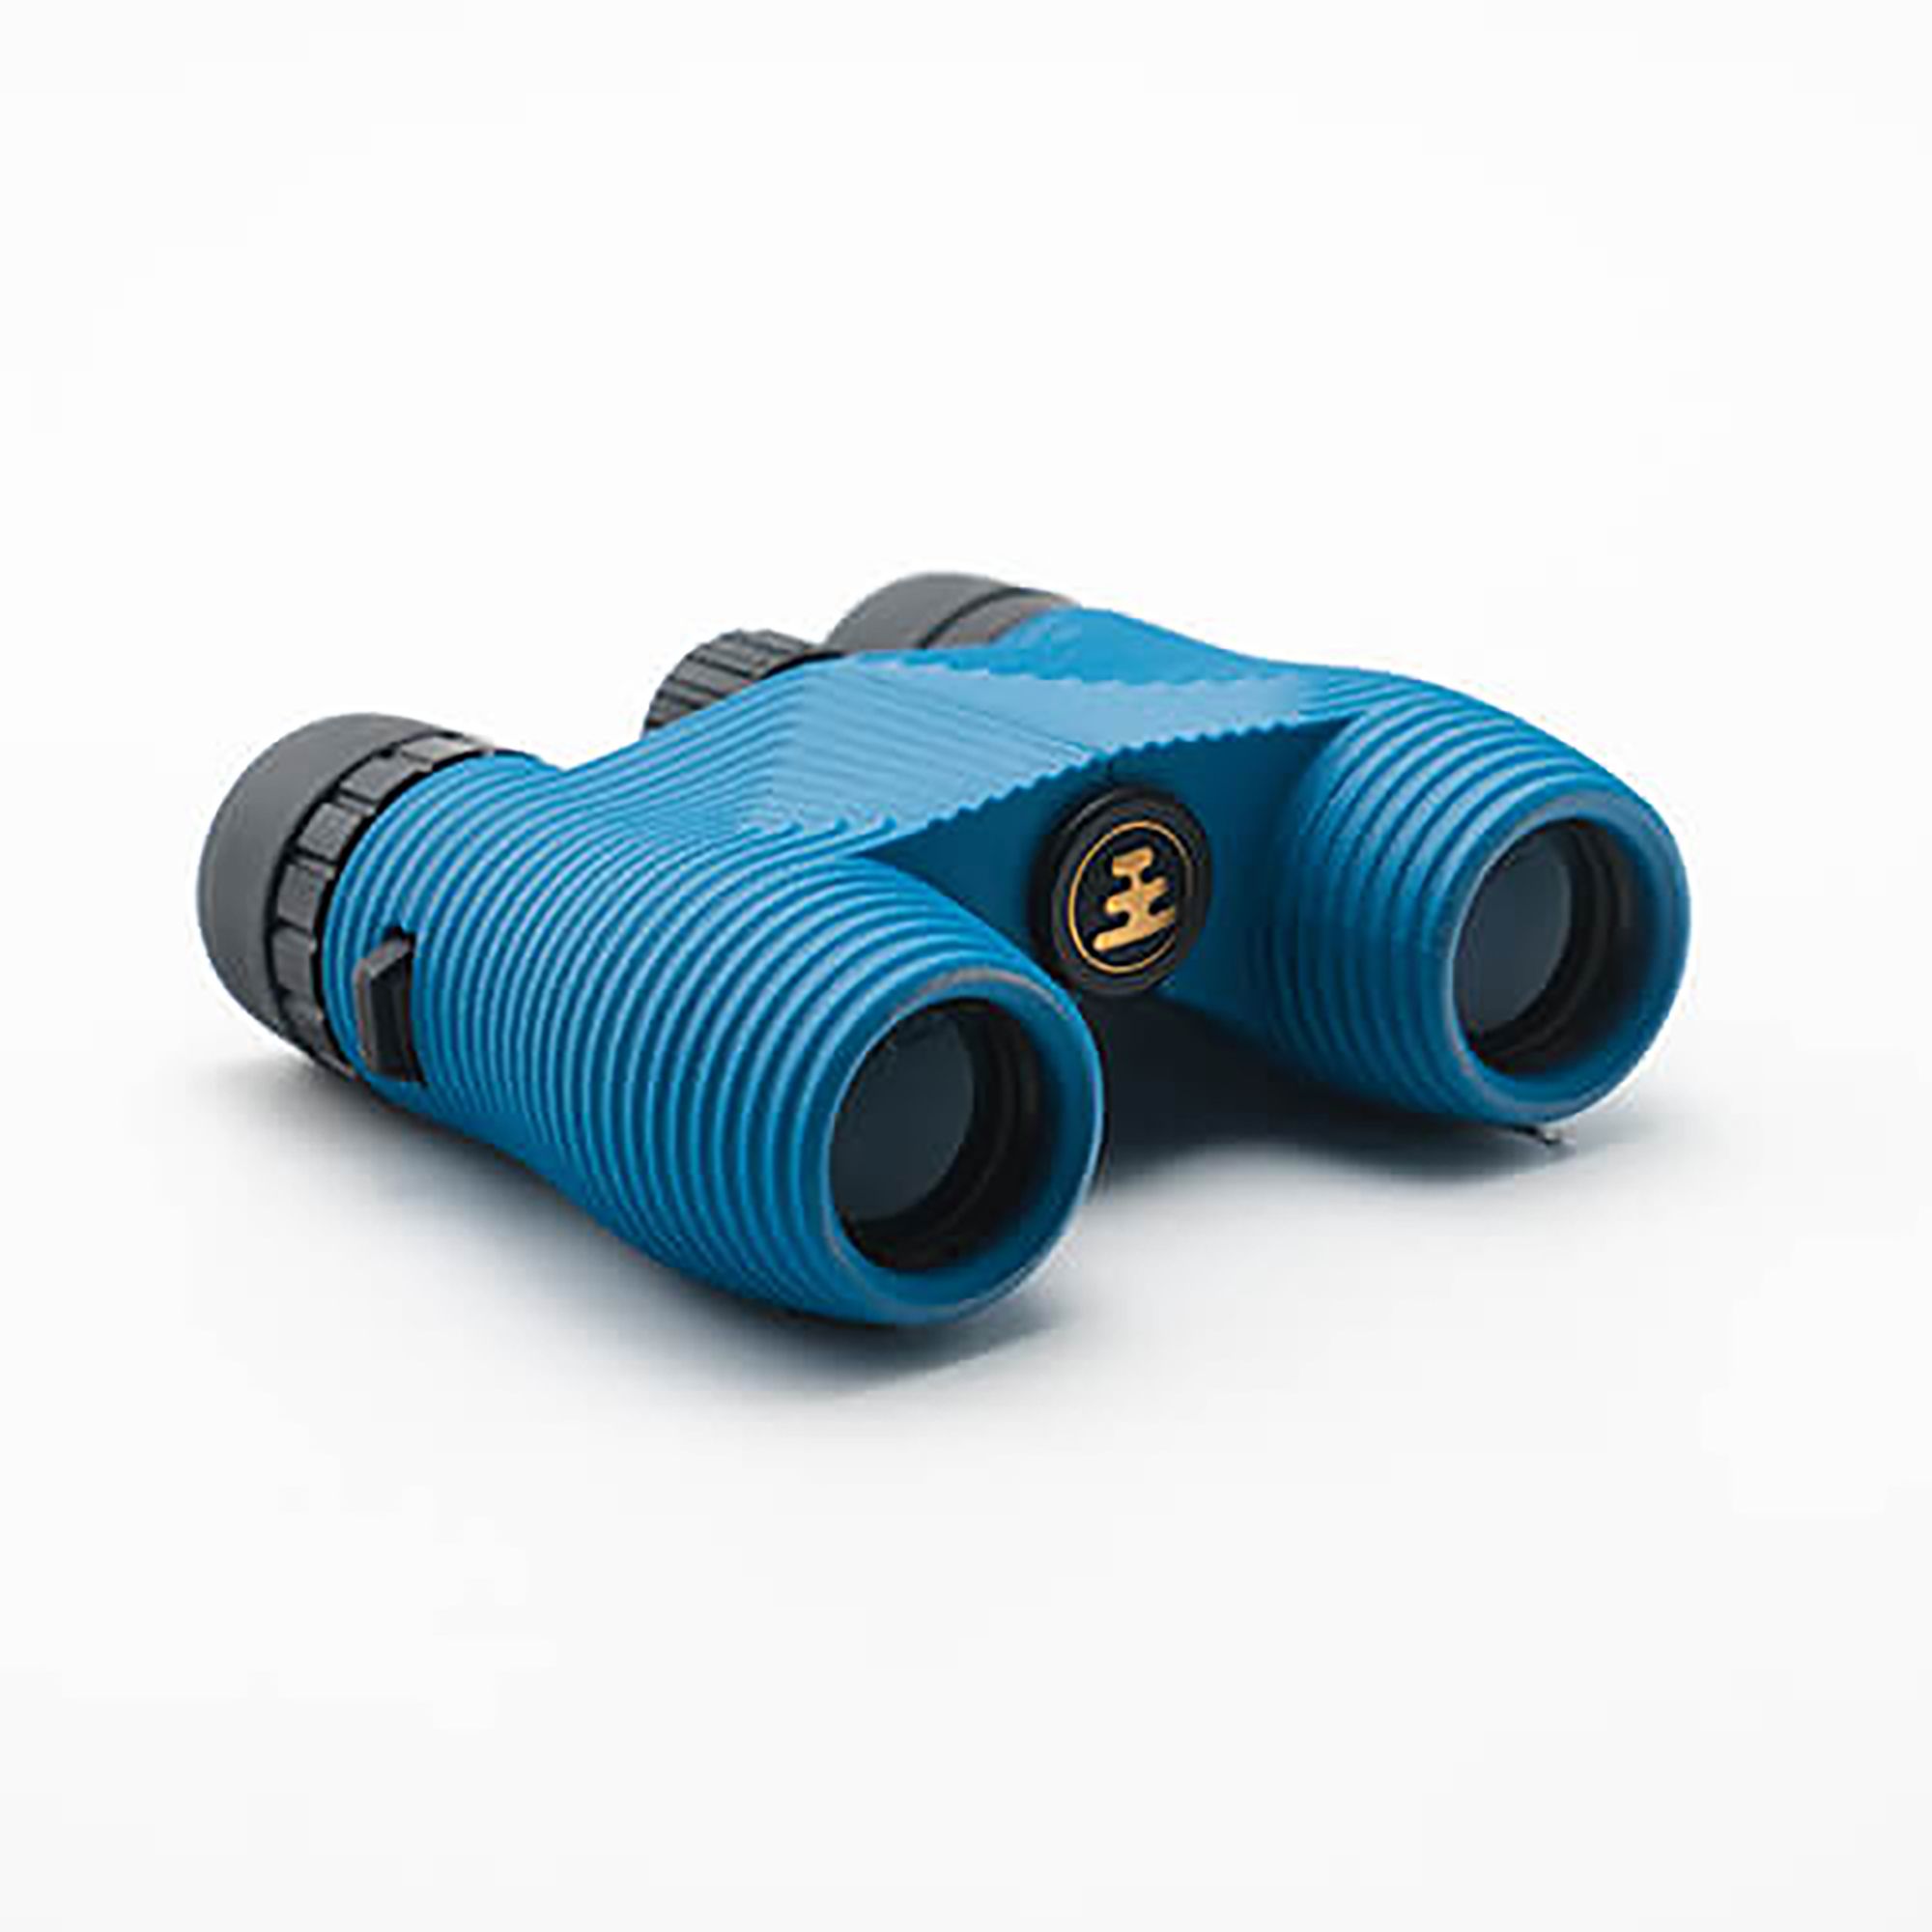 Photos - Other Nocs Provisions Standard Issue 8x25 Binoculars, Full Size, Cobalt Blue 23K